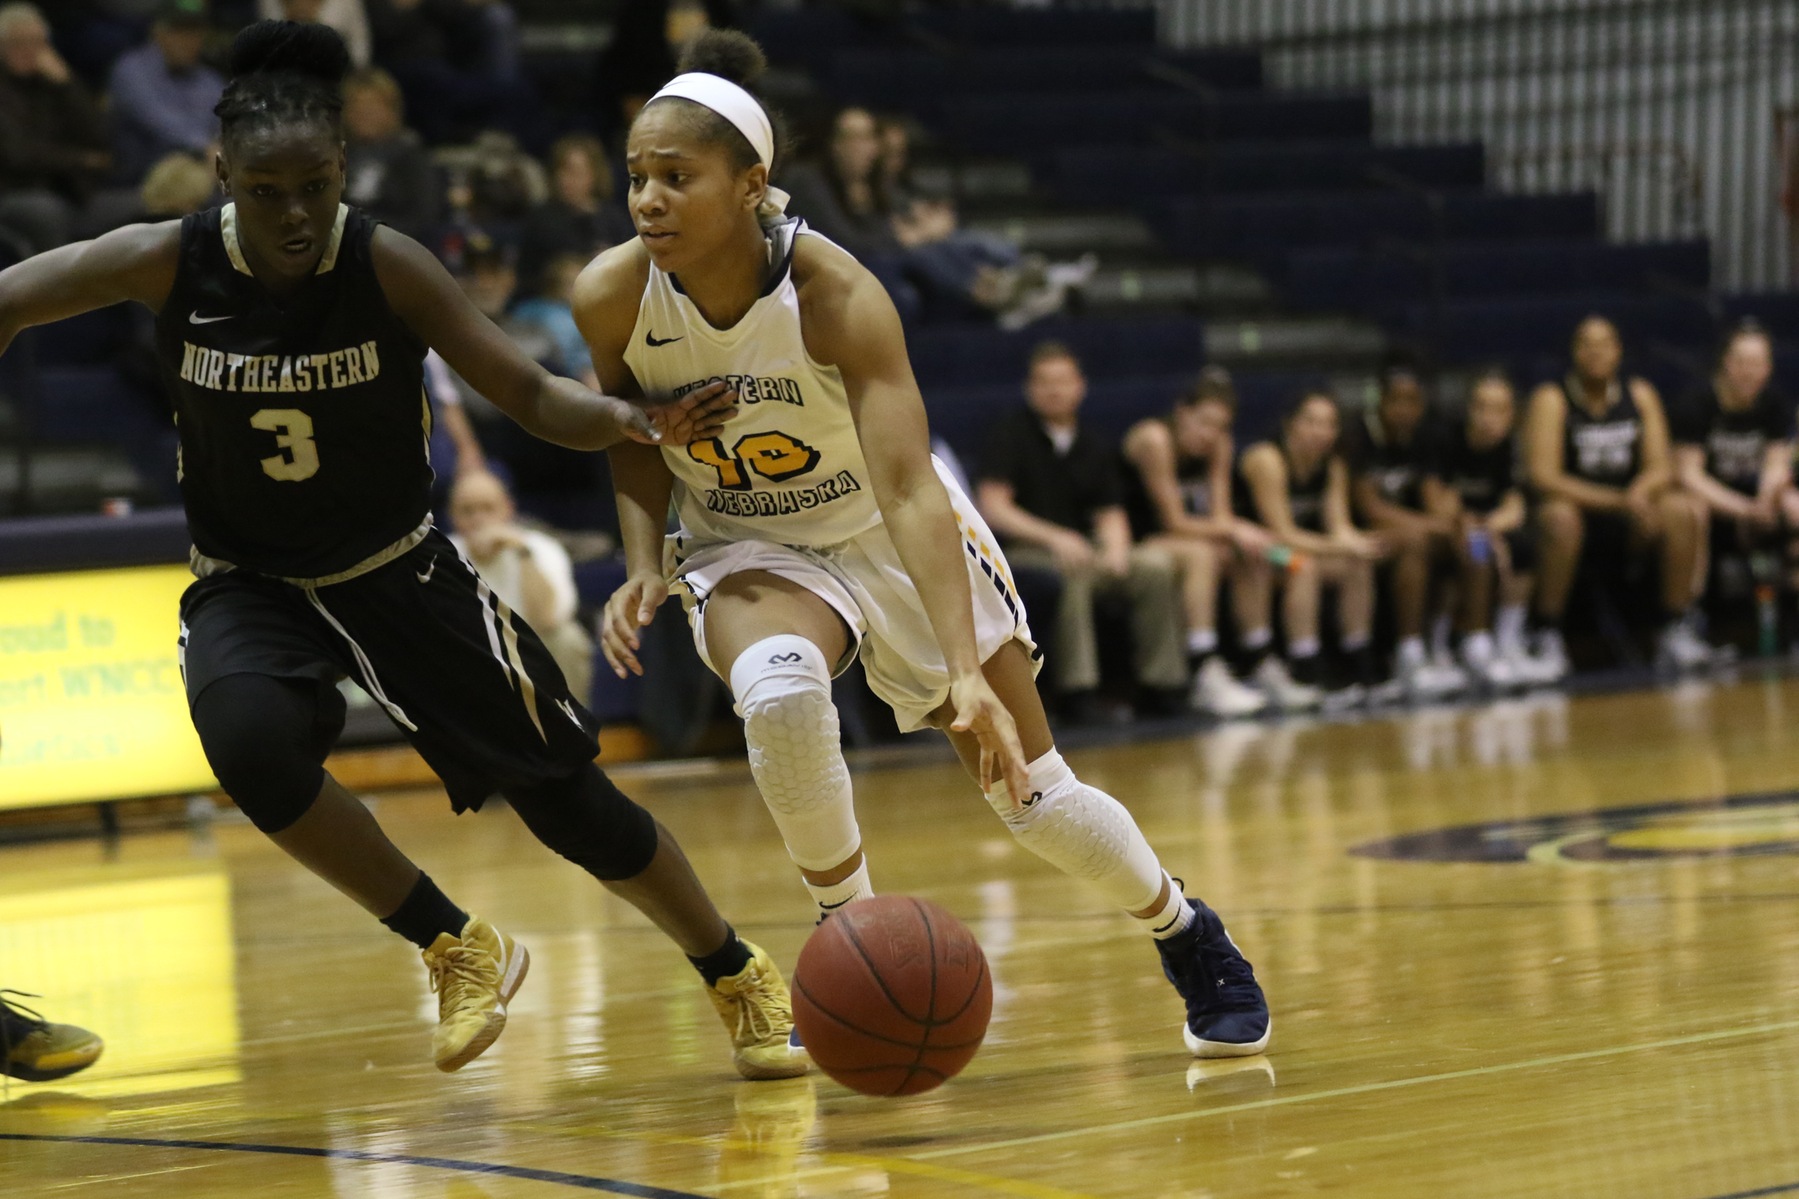 WNCC women with 11th straight, will host regionals in March